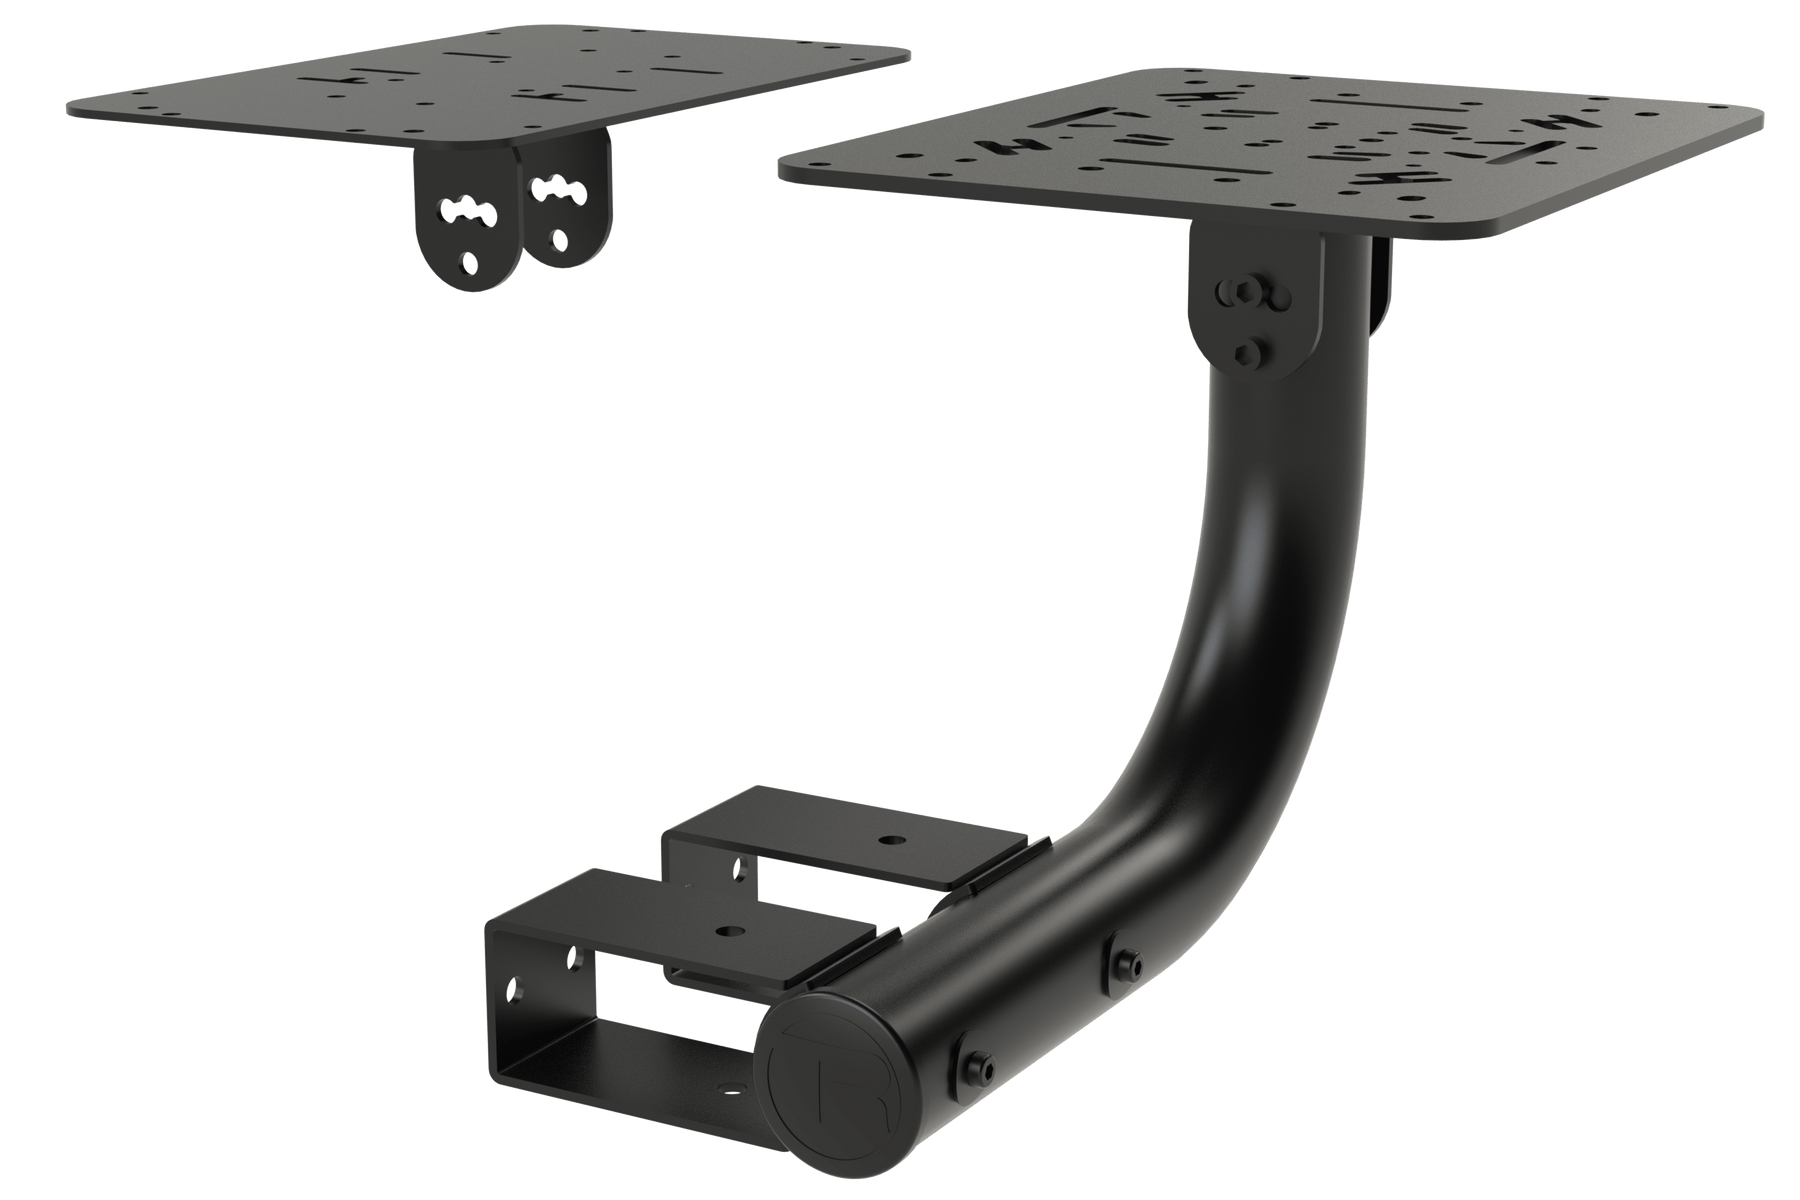 Flight Sim Upgrade Mount for Trak Racer TR8, TR8 Pro and RS6